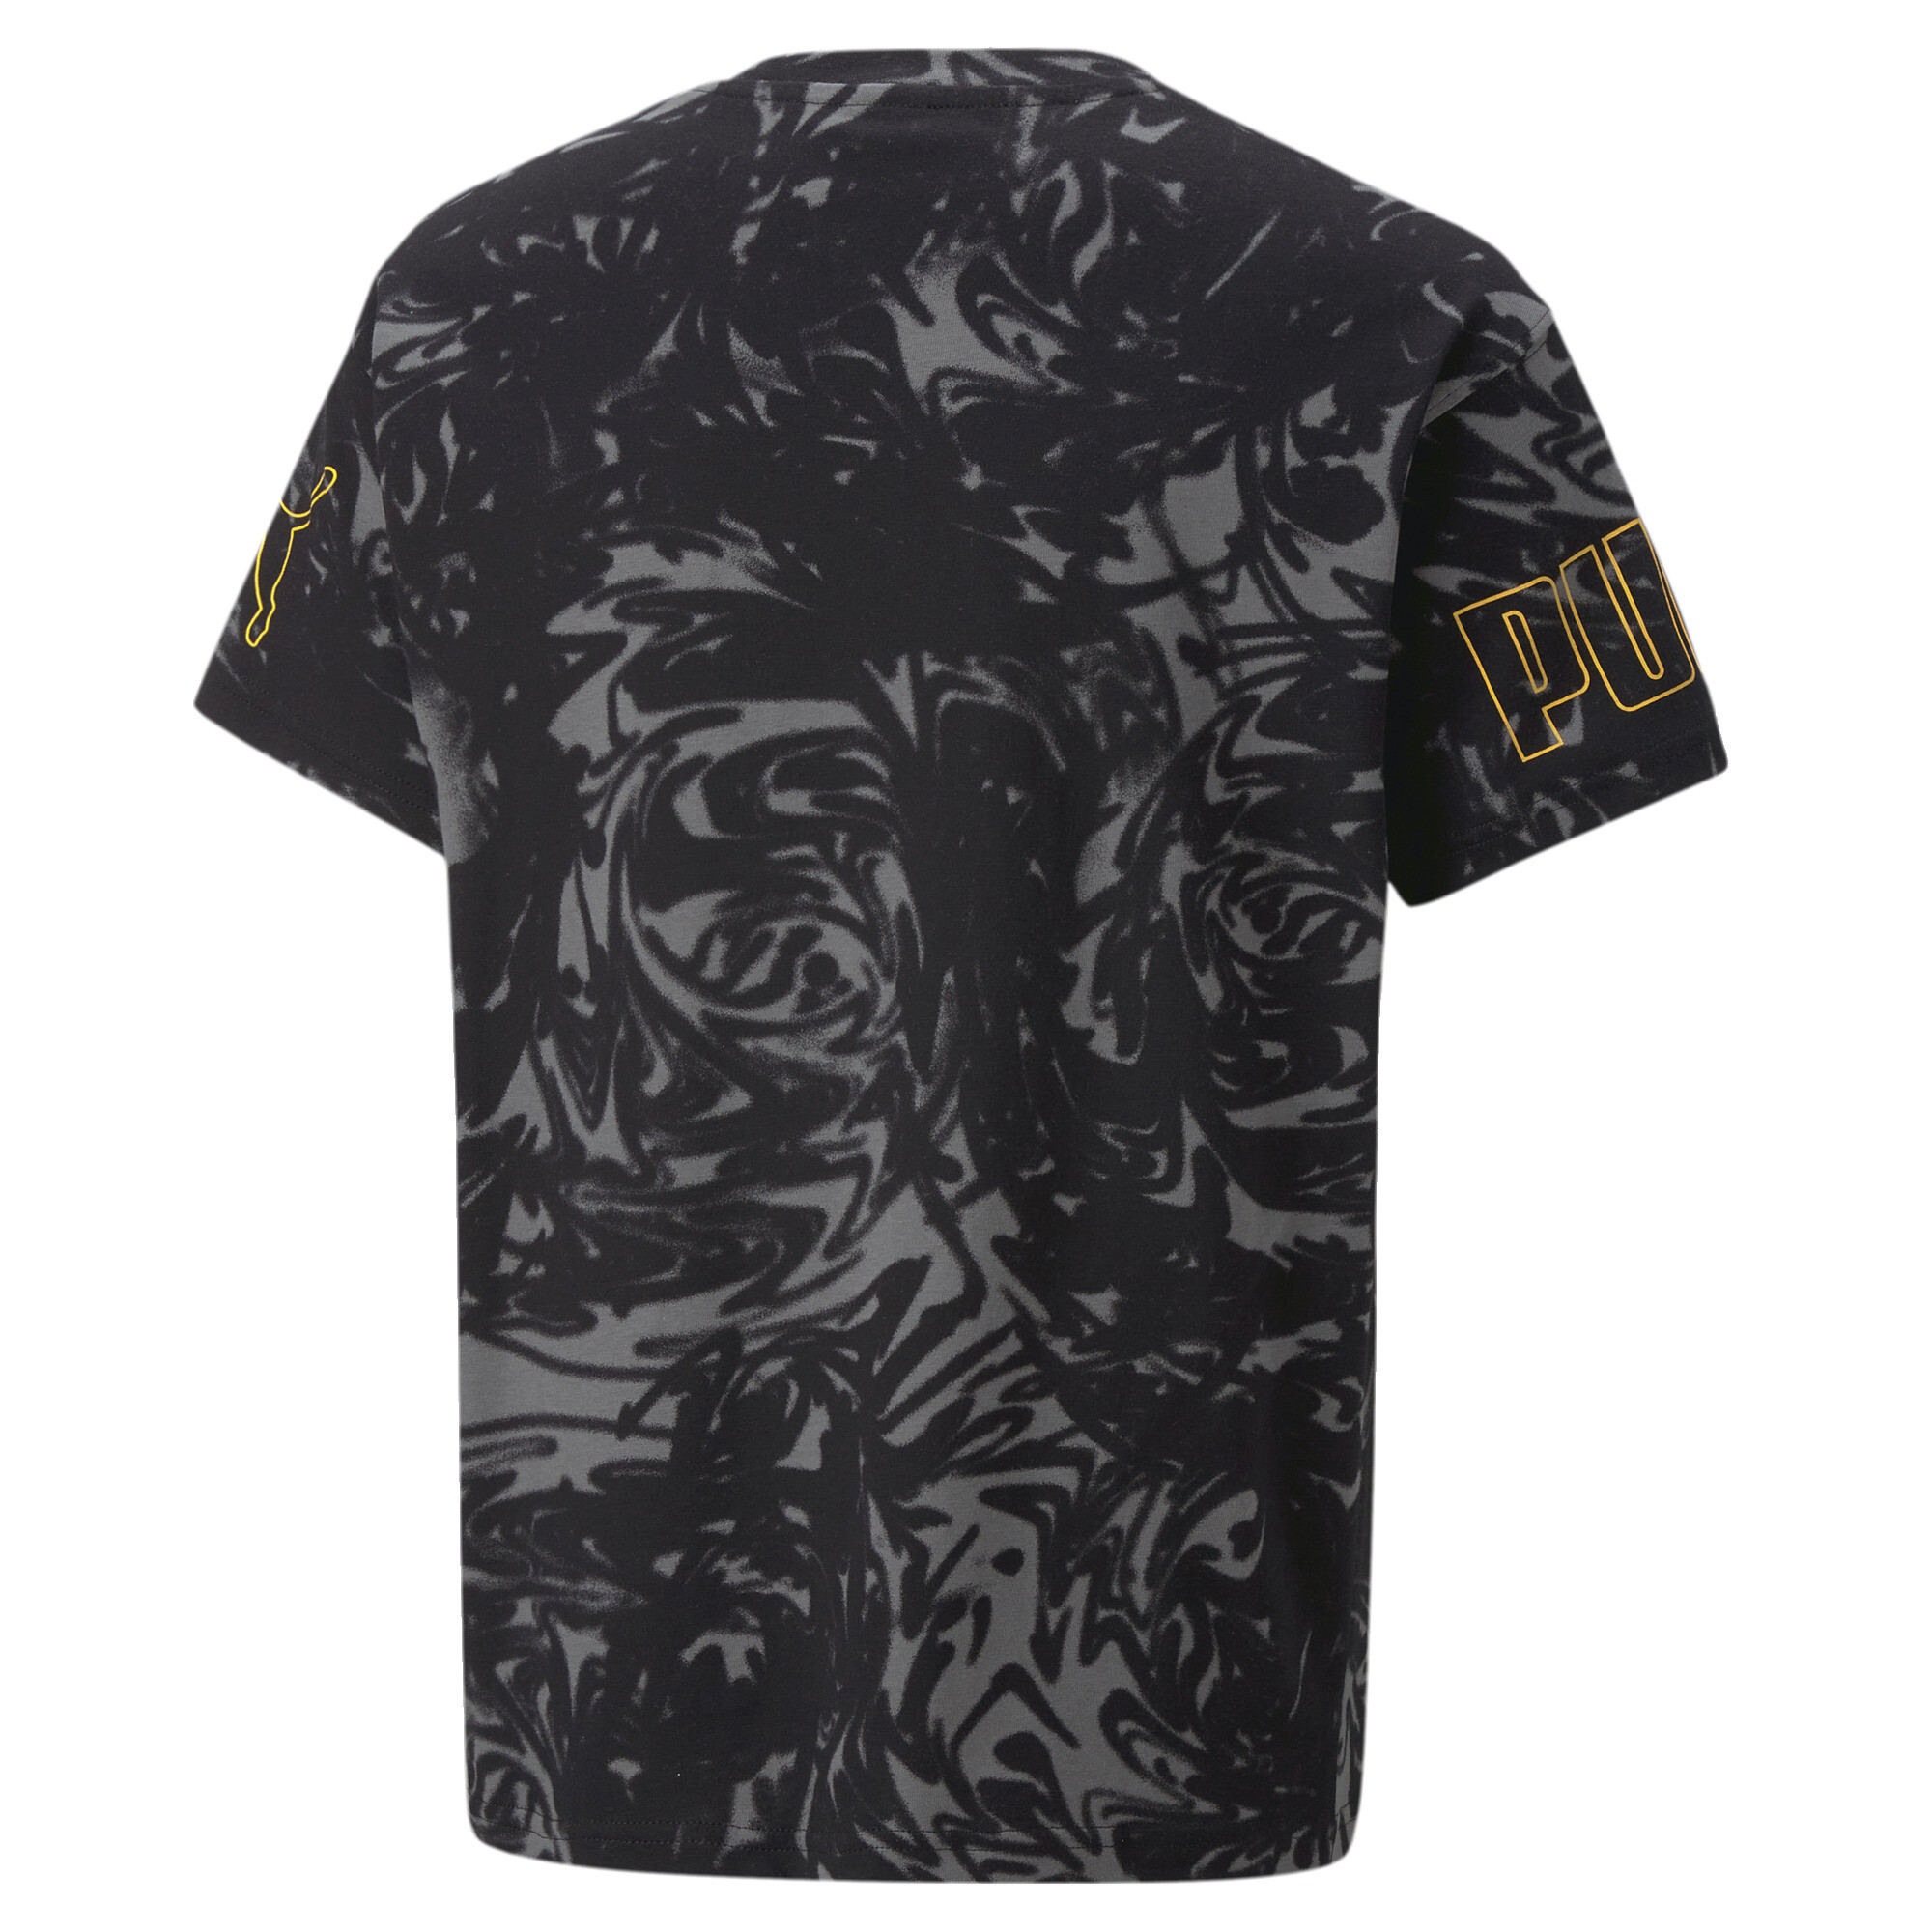 PUMA POWER SUMMER Printed T-Shirt In Black, Size 5-6 Youth